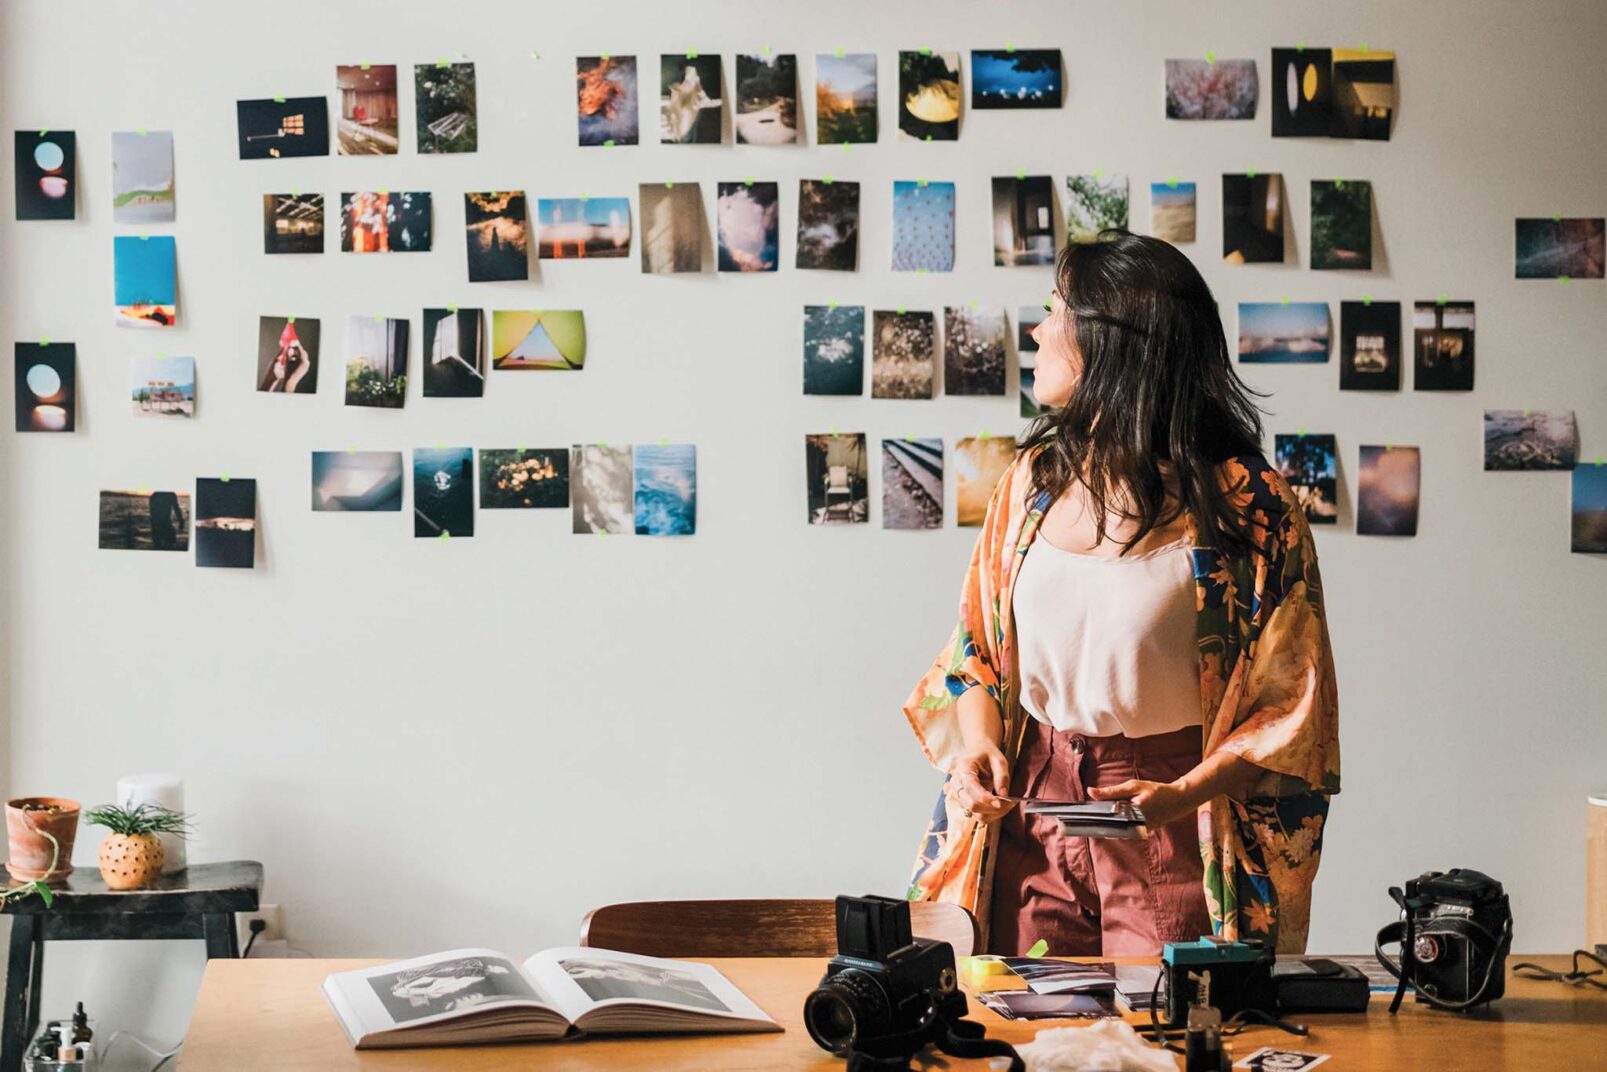 A person stands in front of a wall adorned with a collage of assorted photographs, facing away from the camera. They are surrounded by a creative workspace that includes photography equipment, an open book, a potted plant, and various personal items on a wooden table.